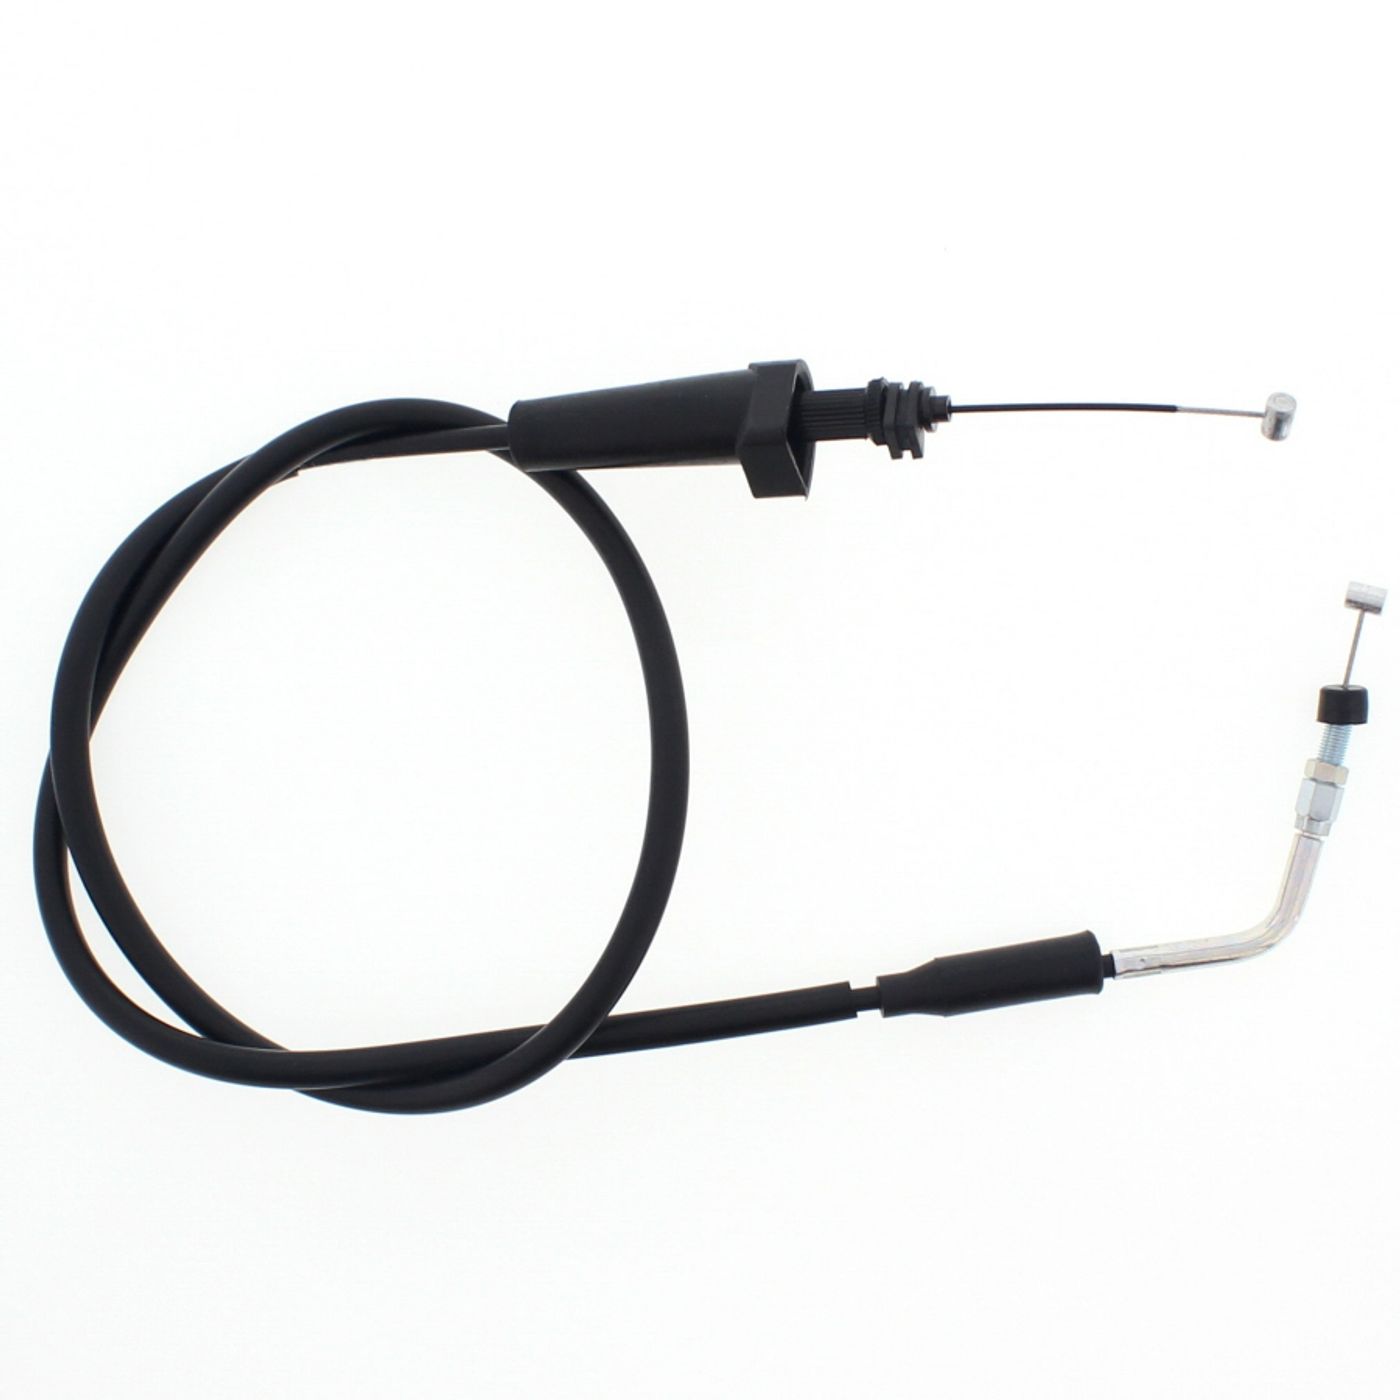 Wrp Throttle Cables - WRP451167 image